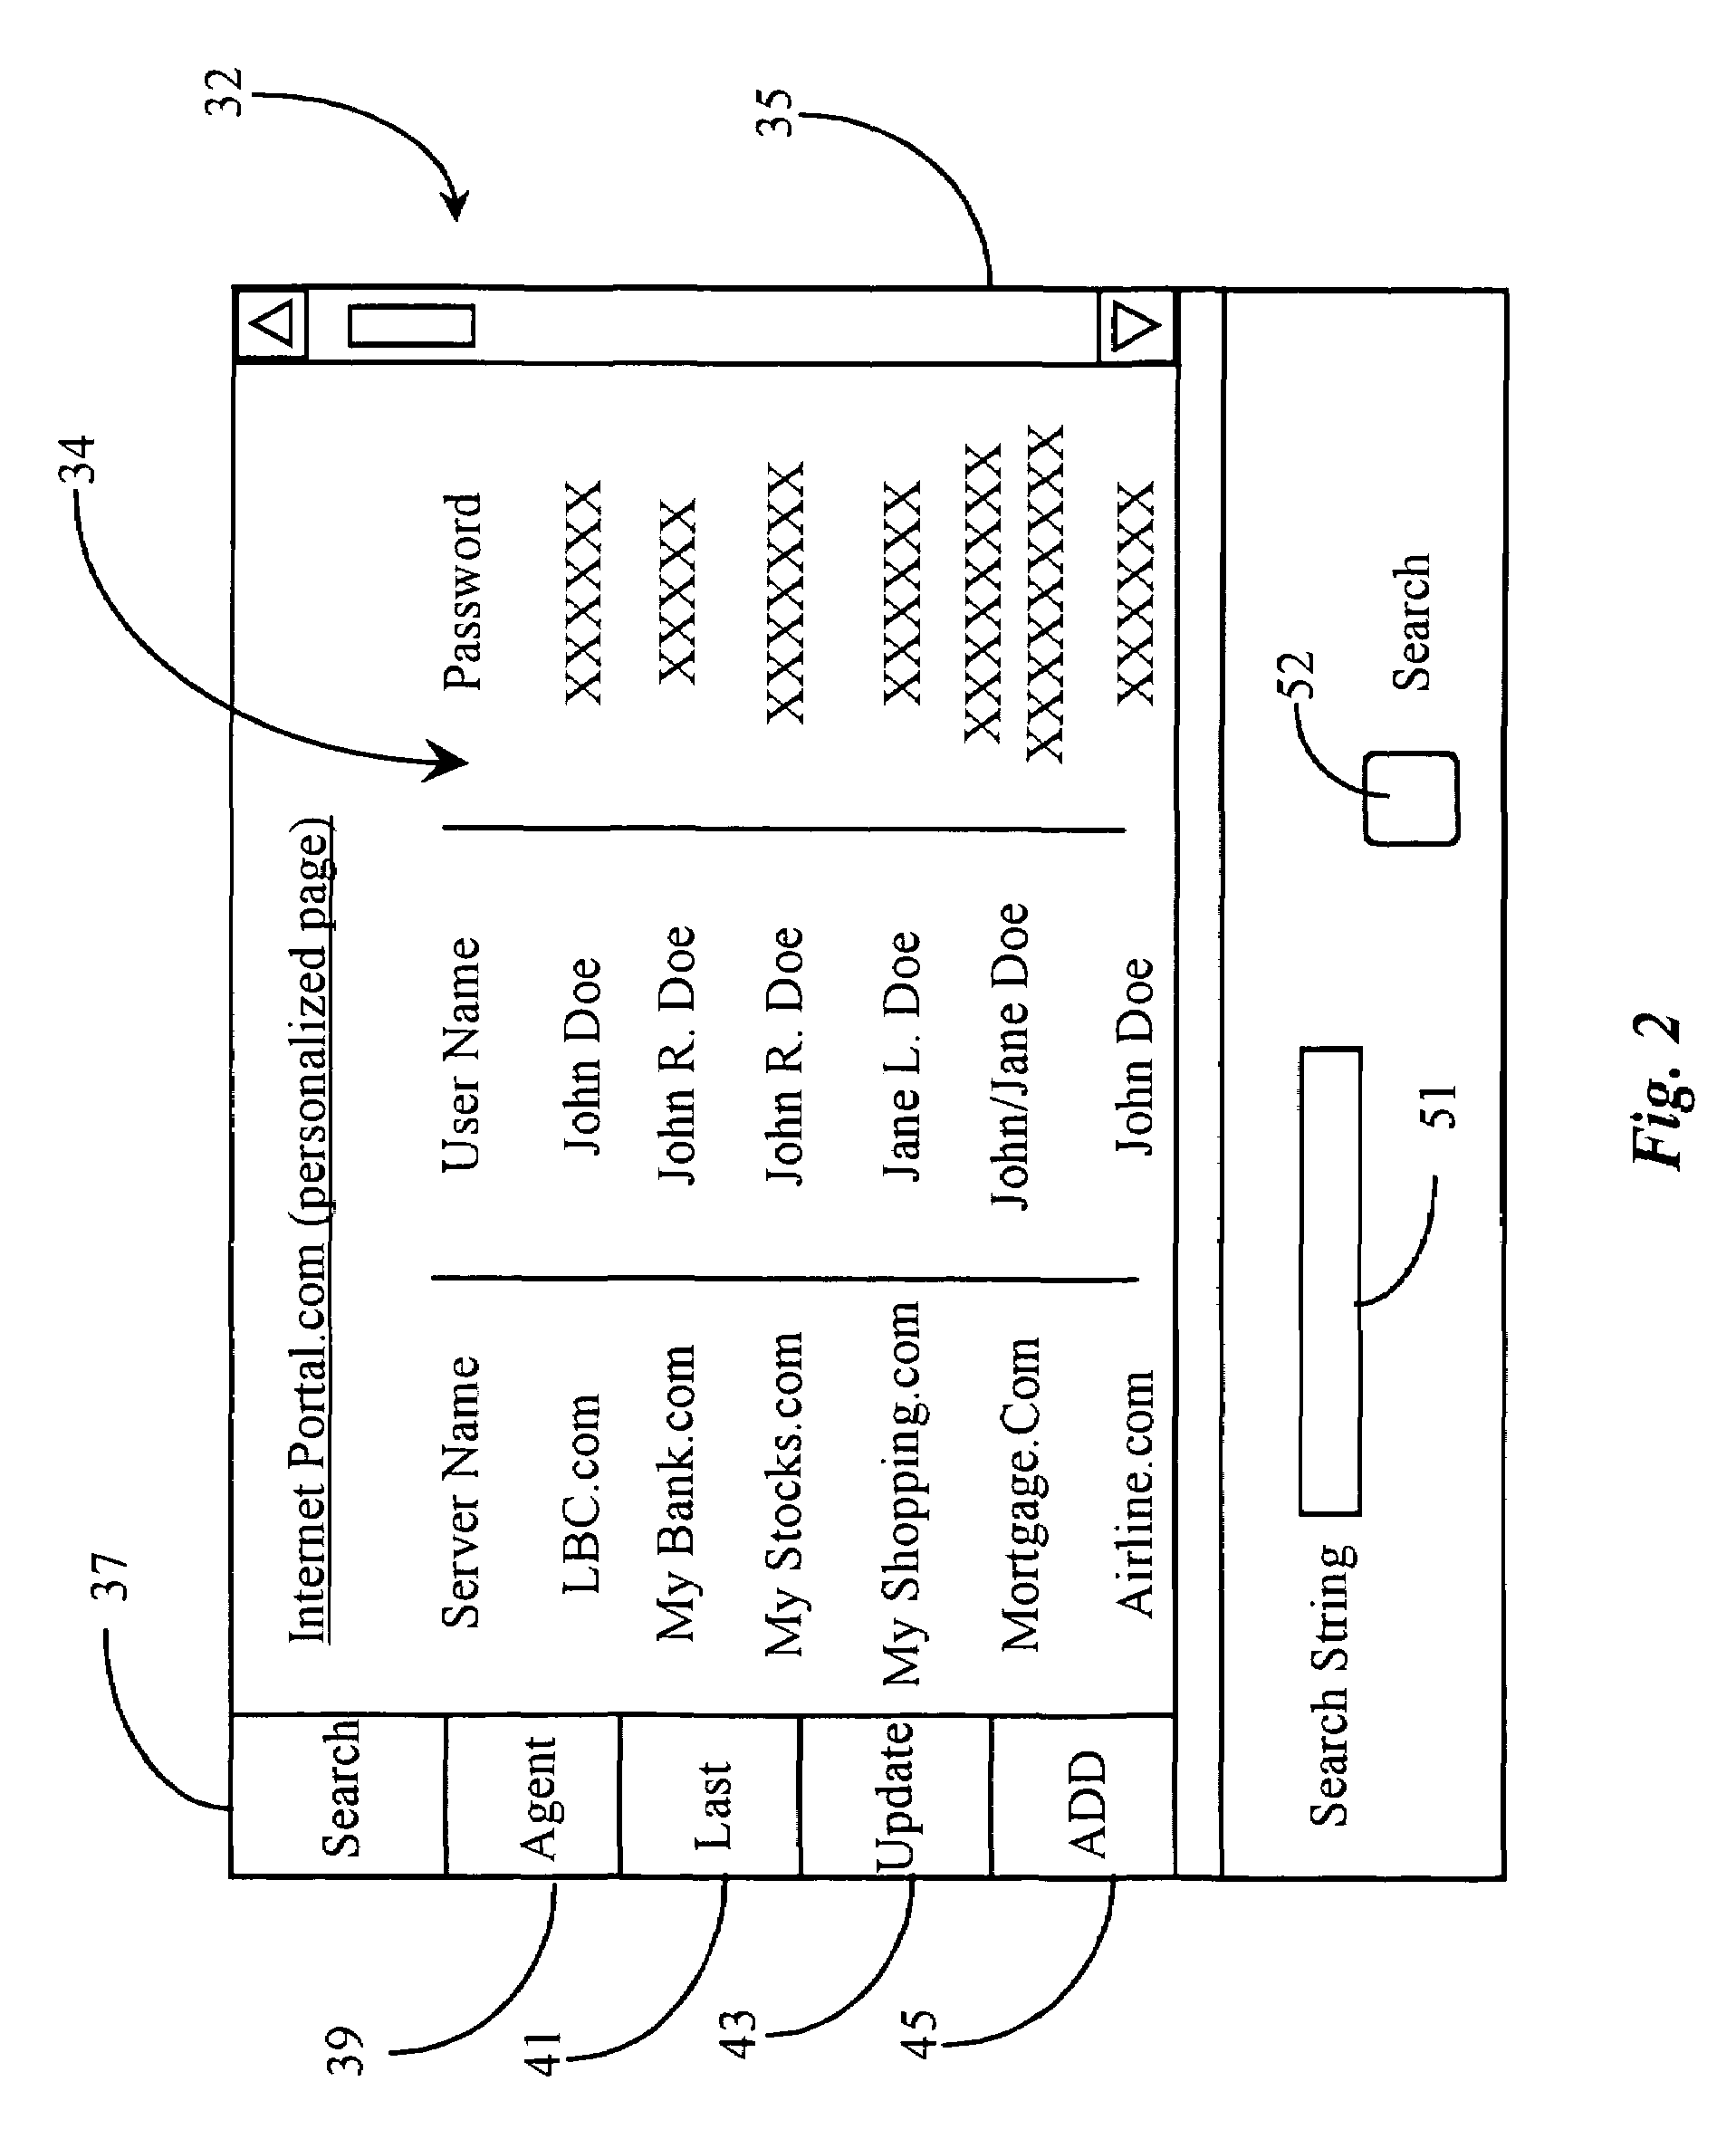 Method and apparatus for providing automation to an internet navigation application